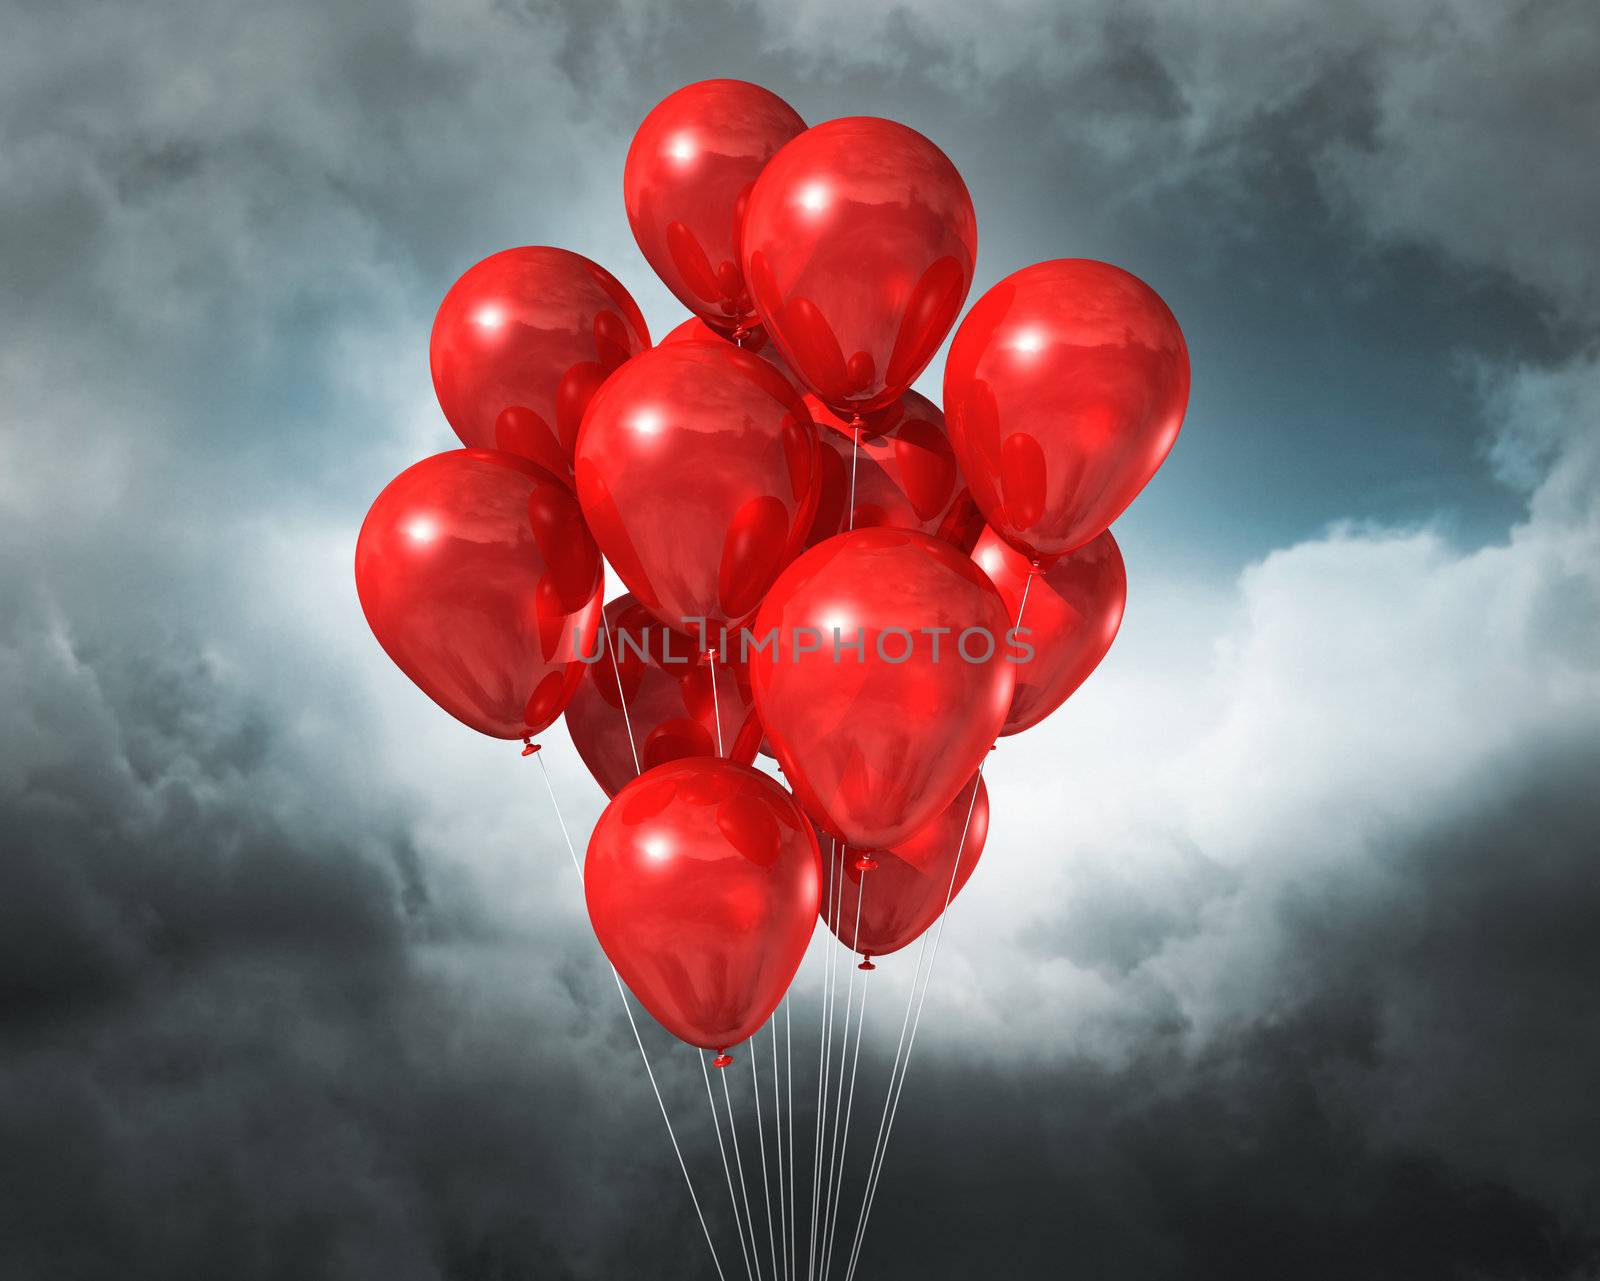 red balloons on a cloudy dramatic sky by daboost